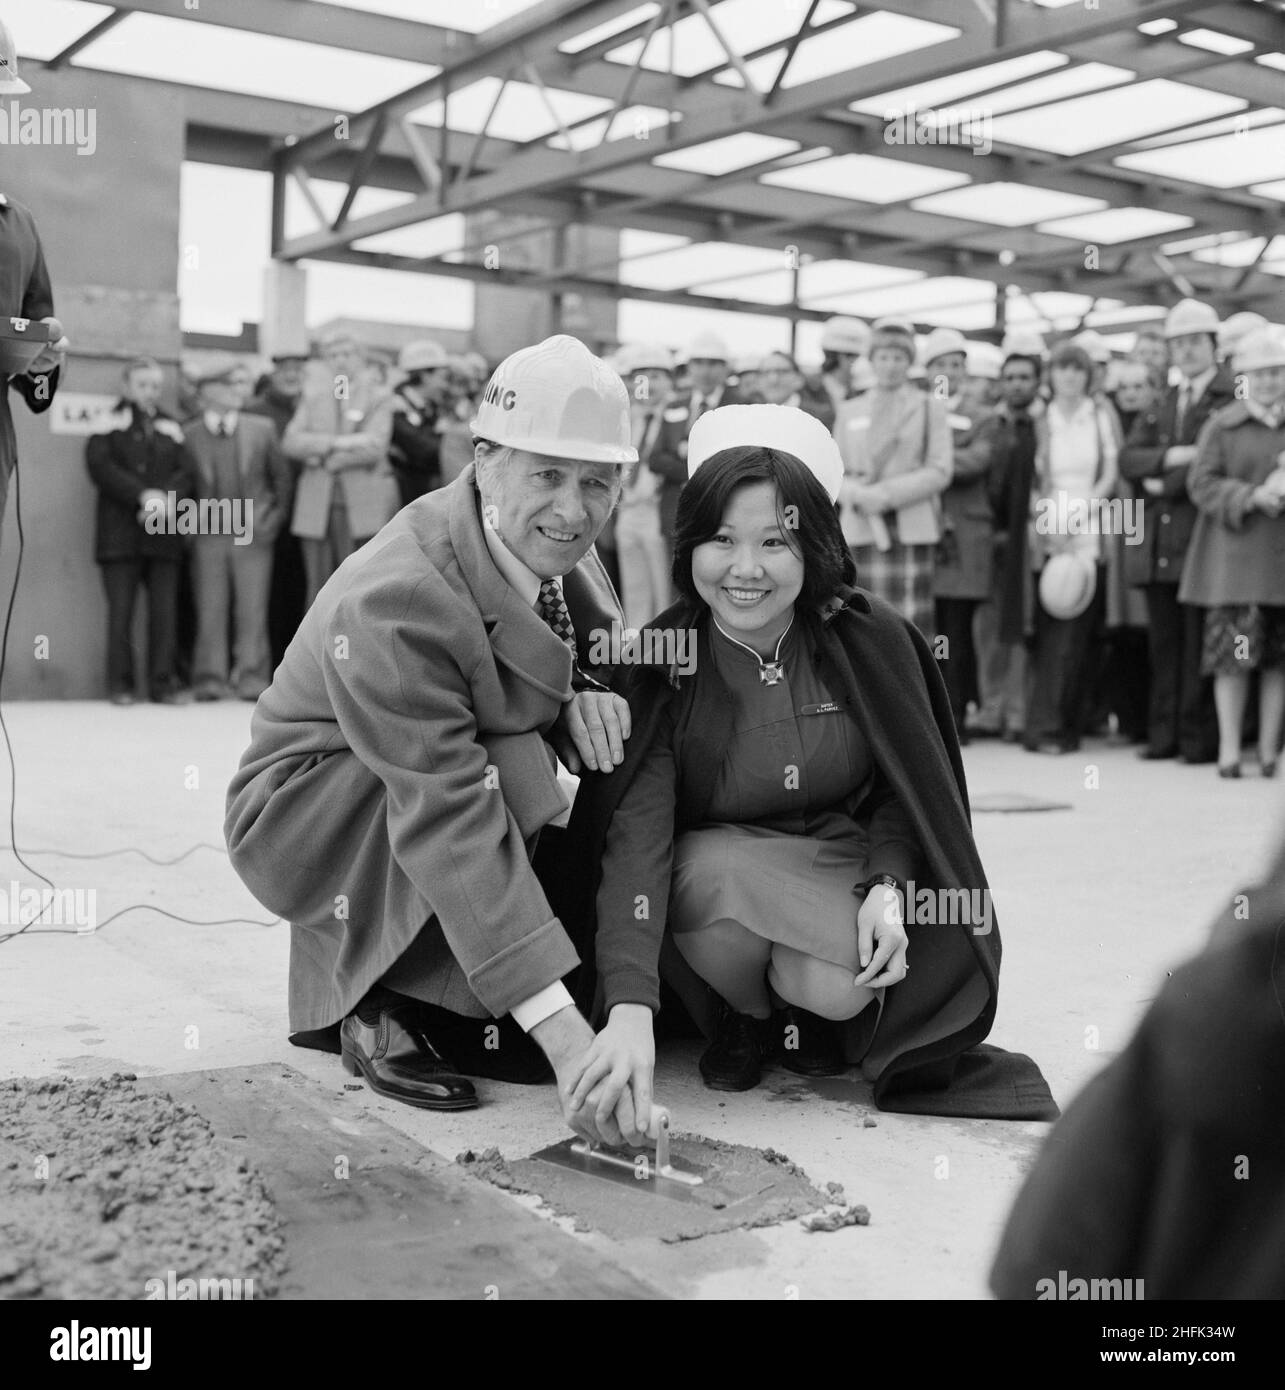 Mayday Hospital, London Road, West Thornton, Croydon, London, 01/05/1981. Denis Sweaney, Chairman of Croydon Area Health Authority, and Sister S Parvez smoothing the final batch of concrete during the topping out of the services block at Mayday Hospital. Laing&#x2019;s Southern Region was awarded the contract for the first phase of a multi-million pound five phase redevelopment project at Mayday Hospital. The contract included a new three storey surgical block with a linked service block, which was to be connected to the main hospital complex by bridge. The topping out of the services block at Stock Photo